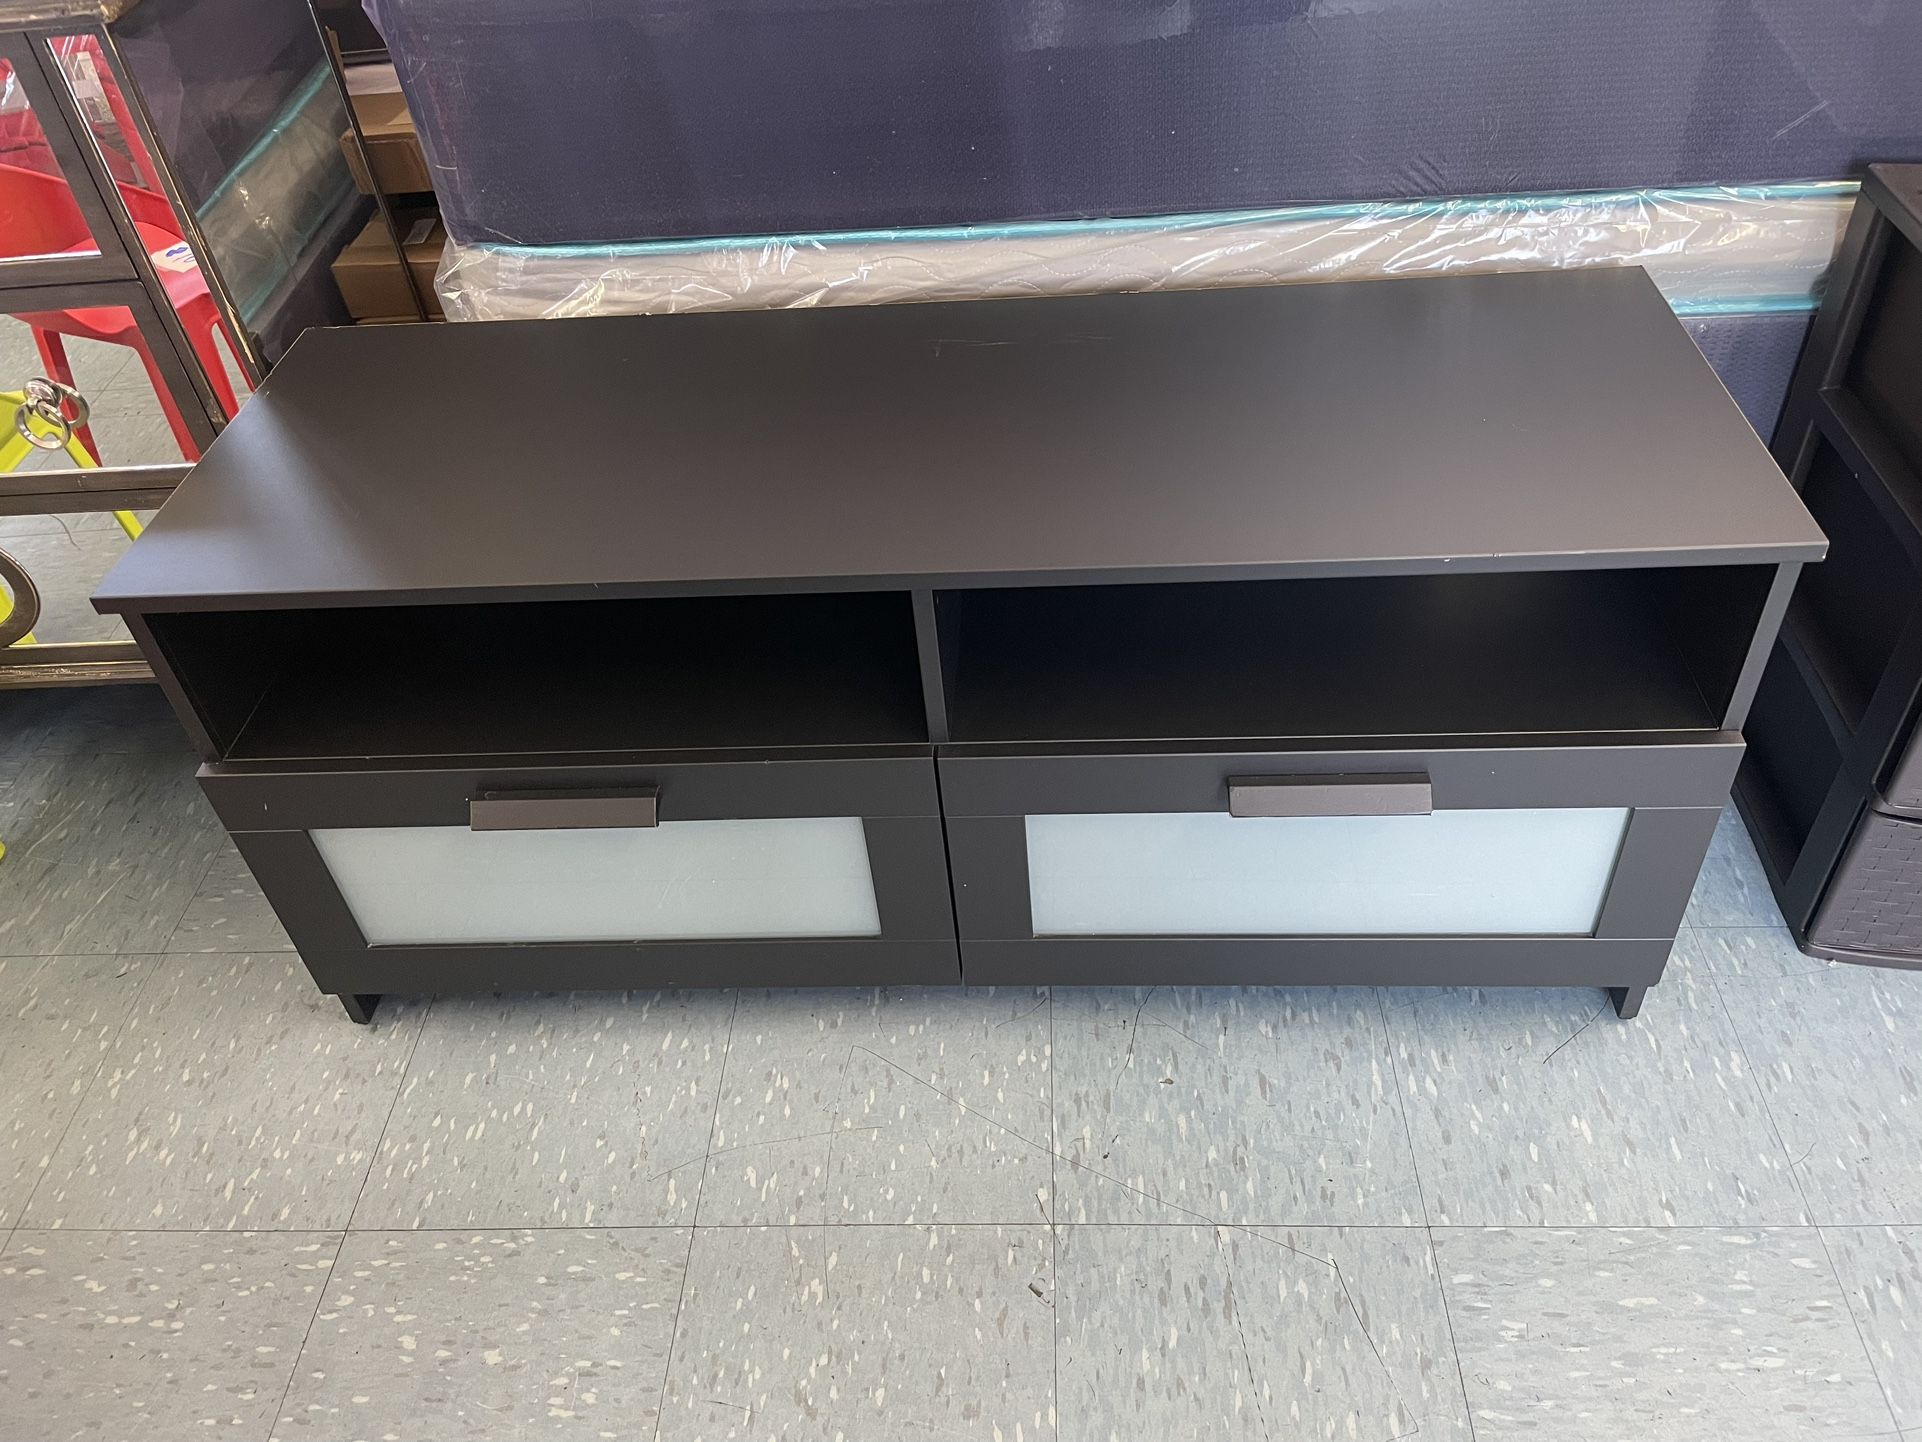 Tv Stand In Great Shape, $60 Delivery Available 